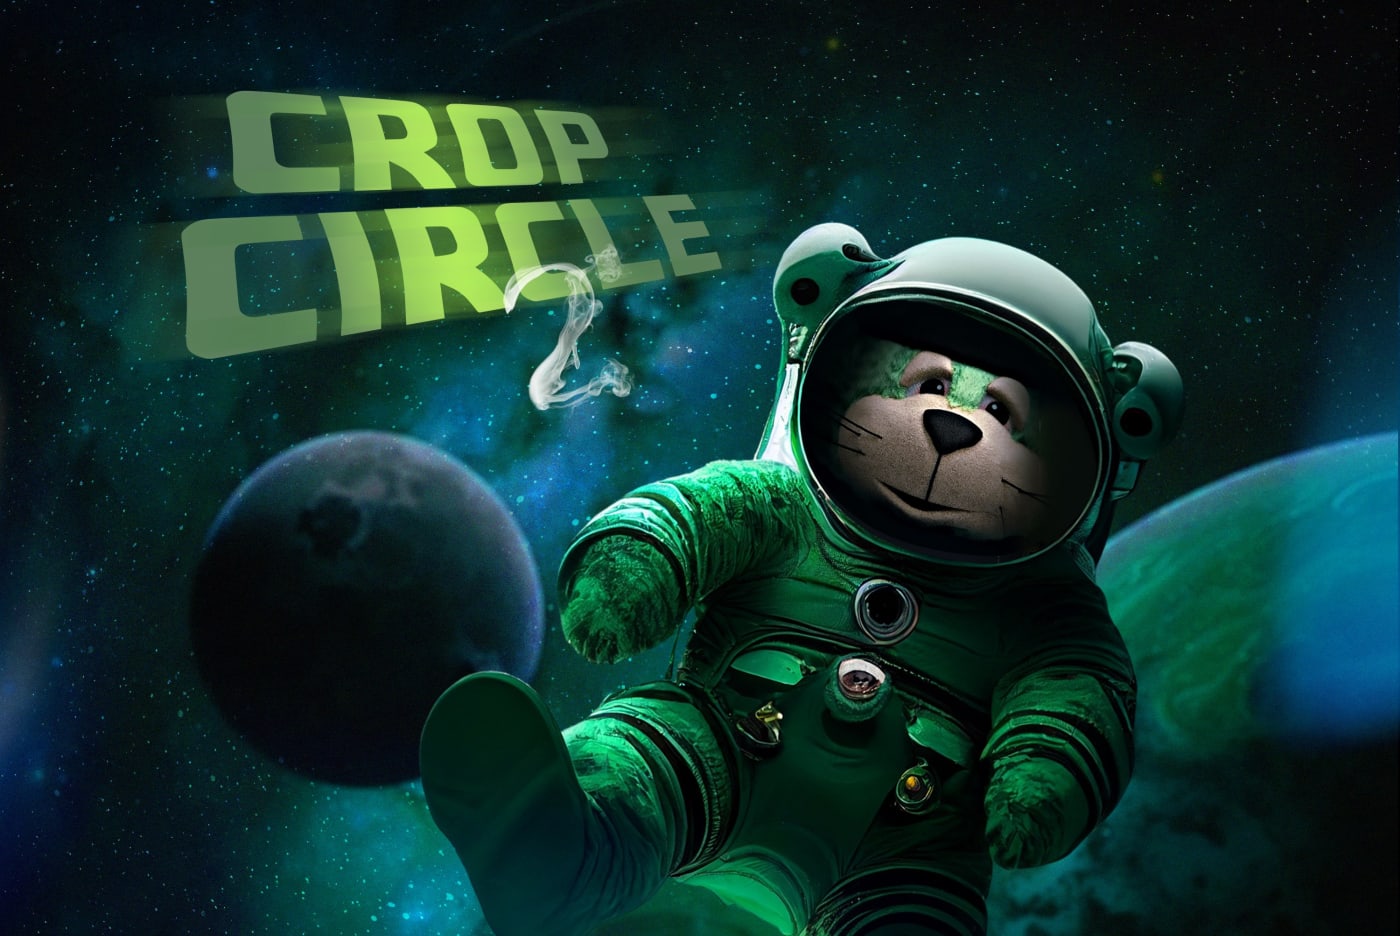 First Impressions Of Nines’ New Album ‘Crop Circle 2’